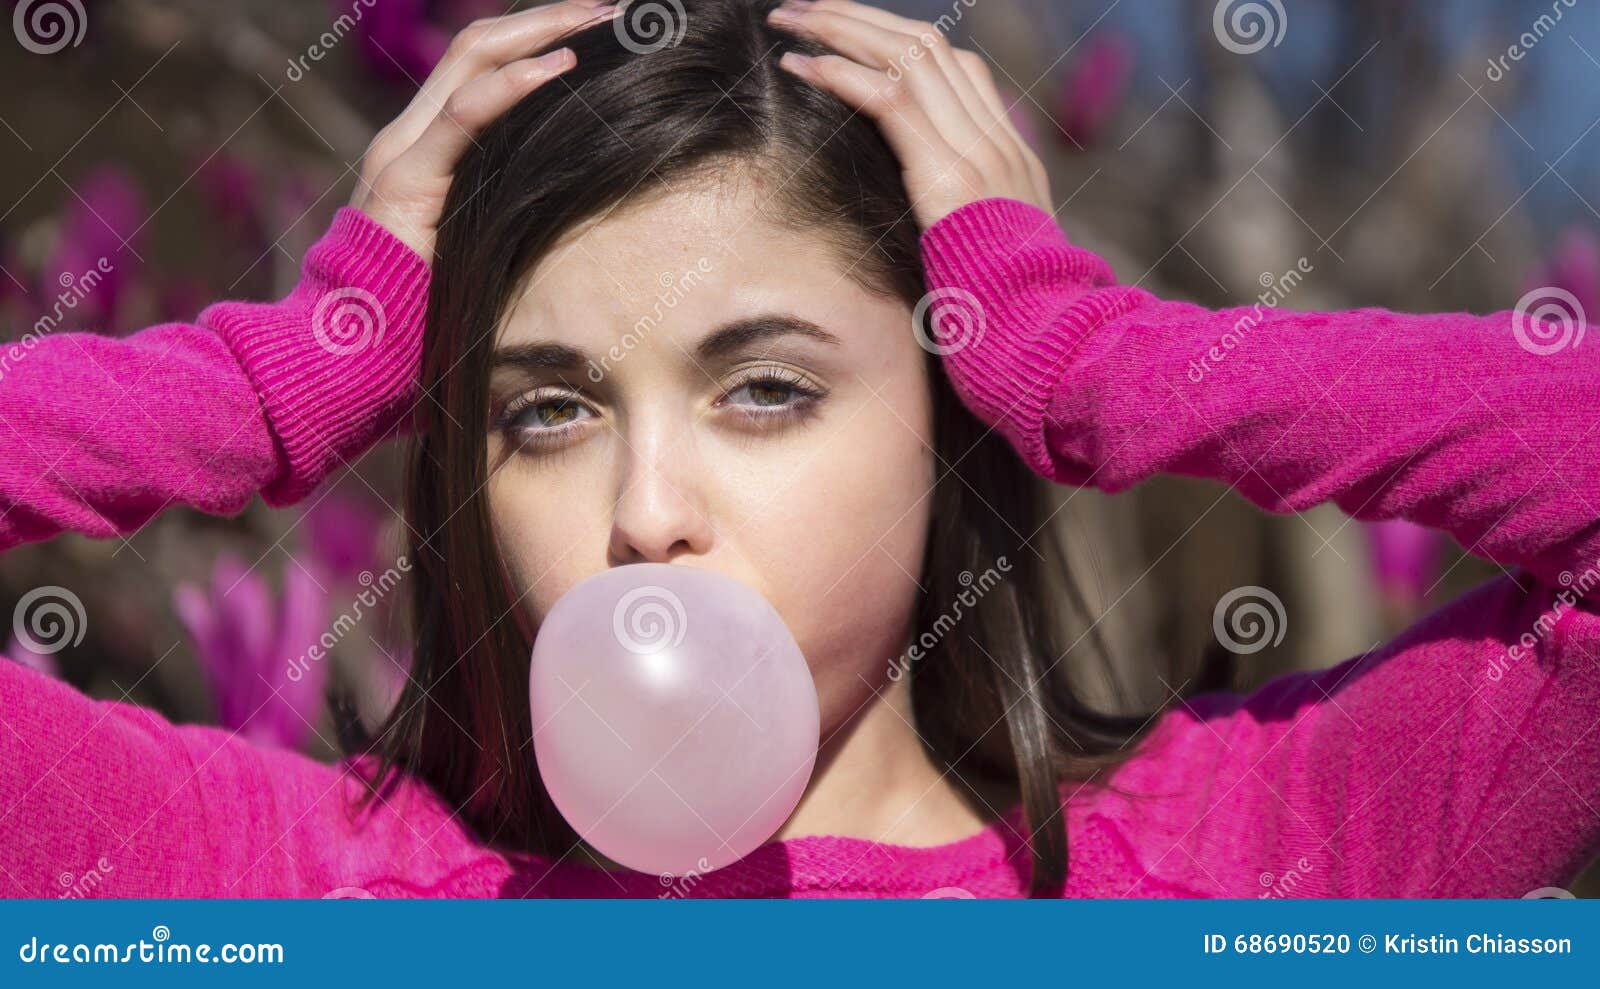 bubble gum blowing teen girls xxx gallery pic